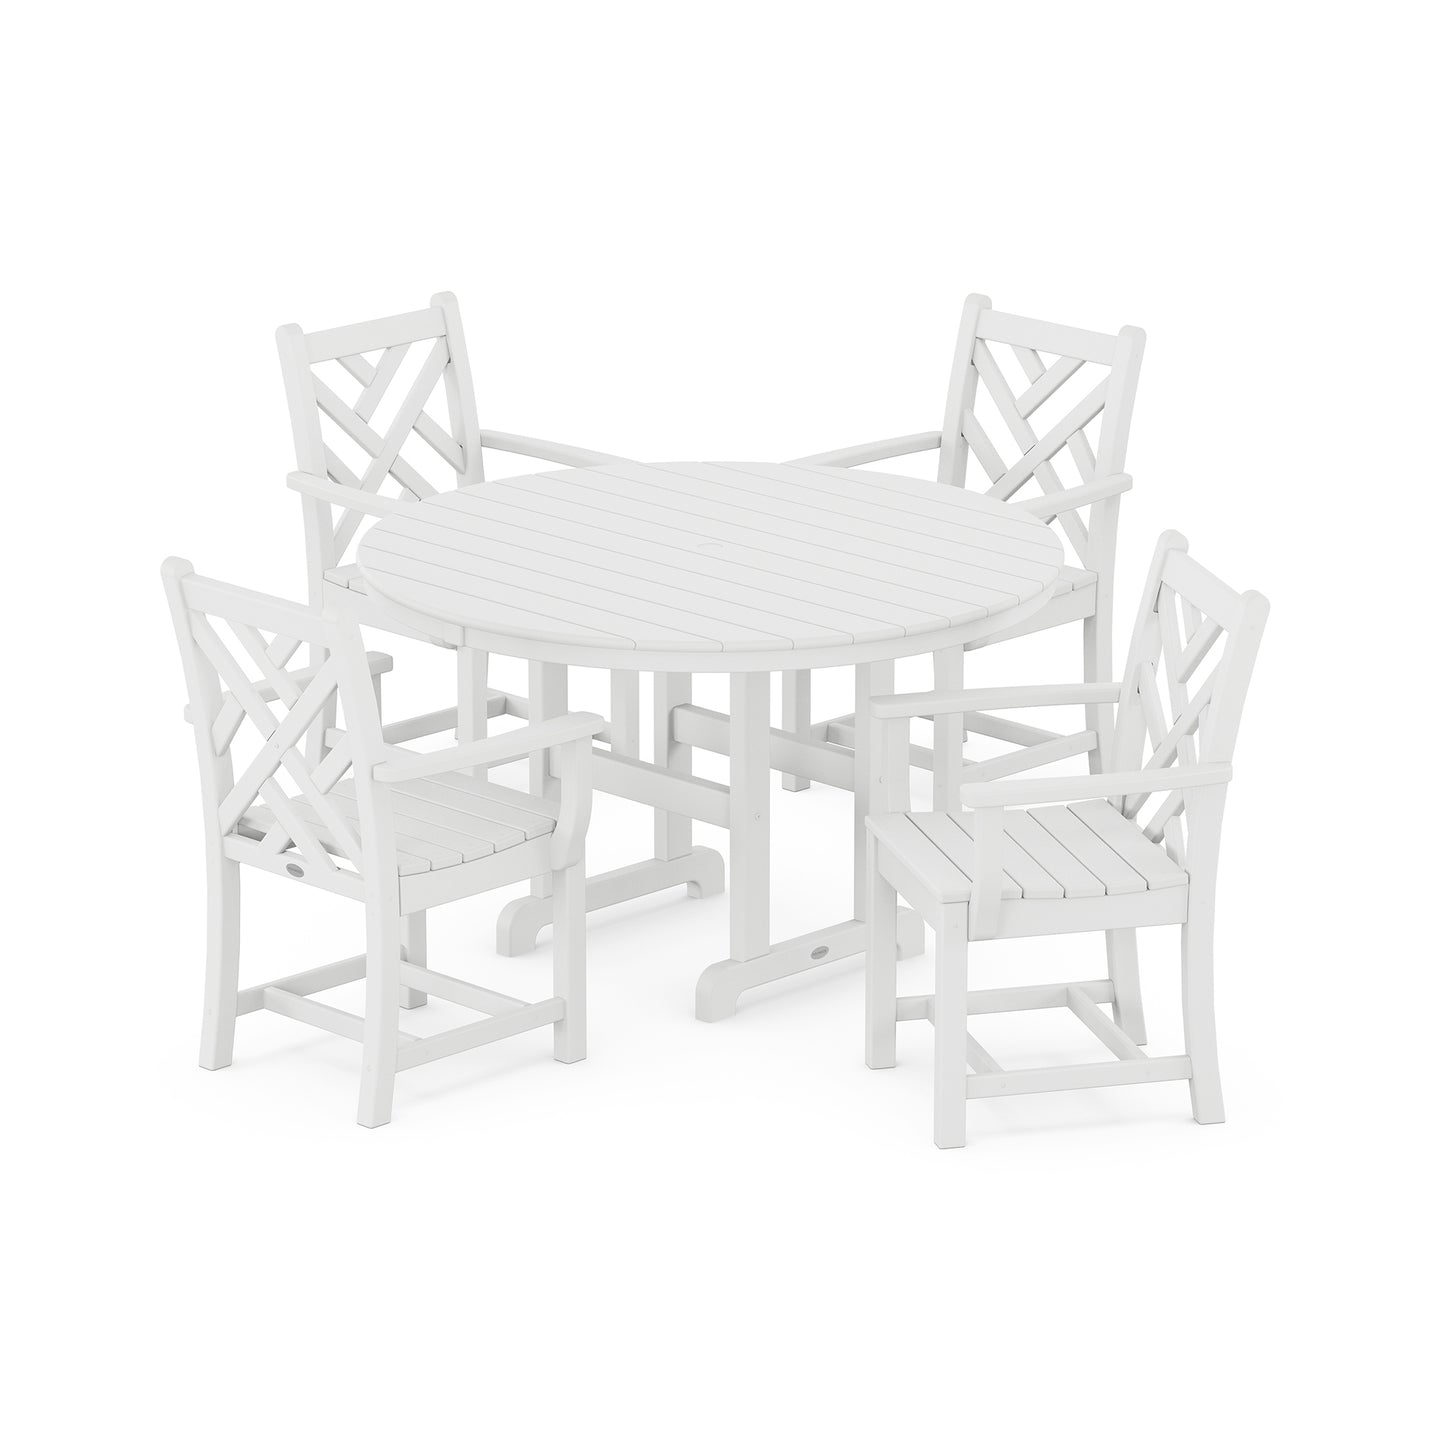 A white POLYWOOD® Chippendale 5-Piece Dining Set consisting of a circular table and four chairs with crossed back designs, all placed on a plain white background.